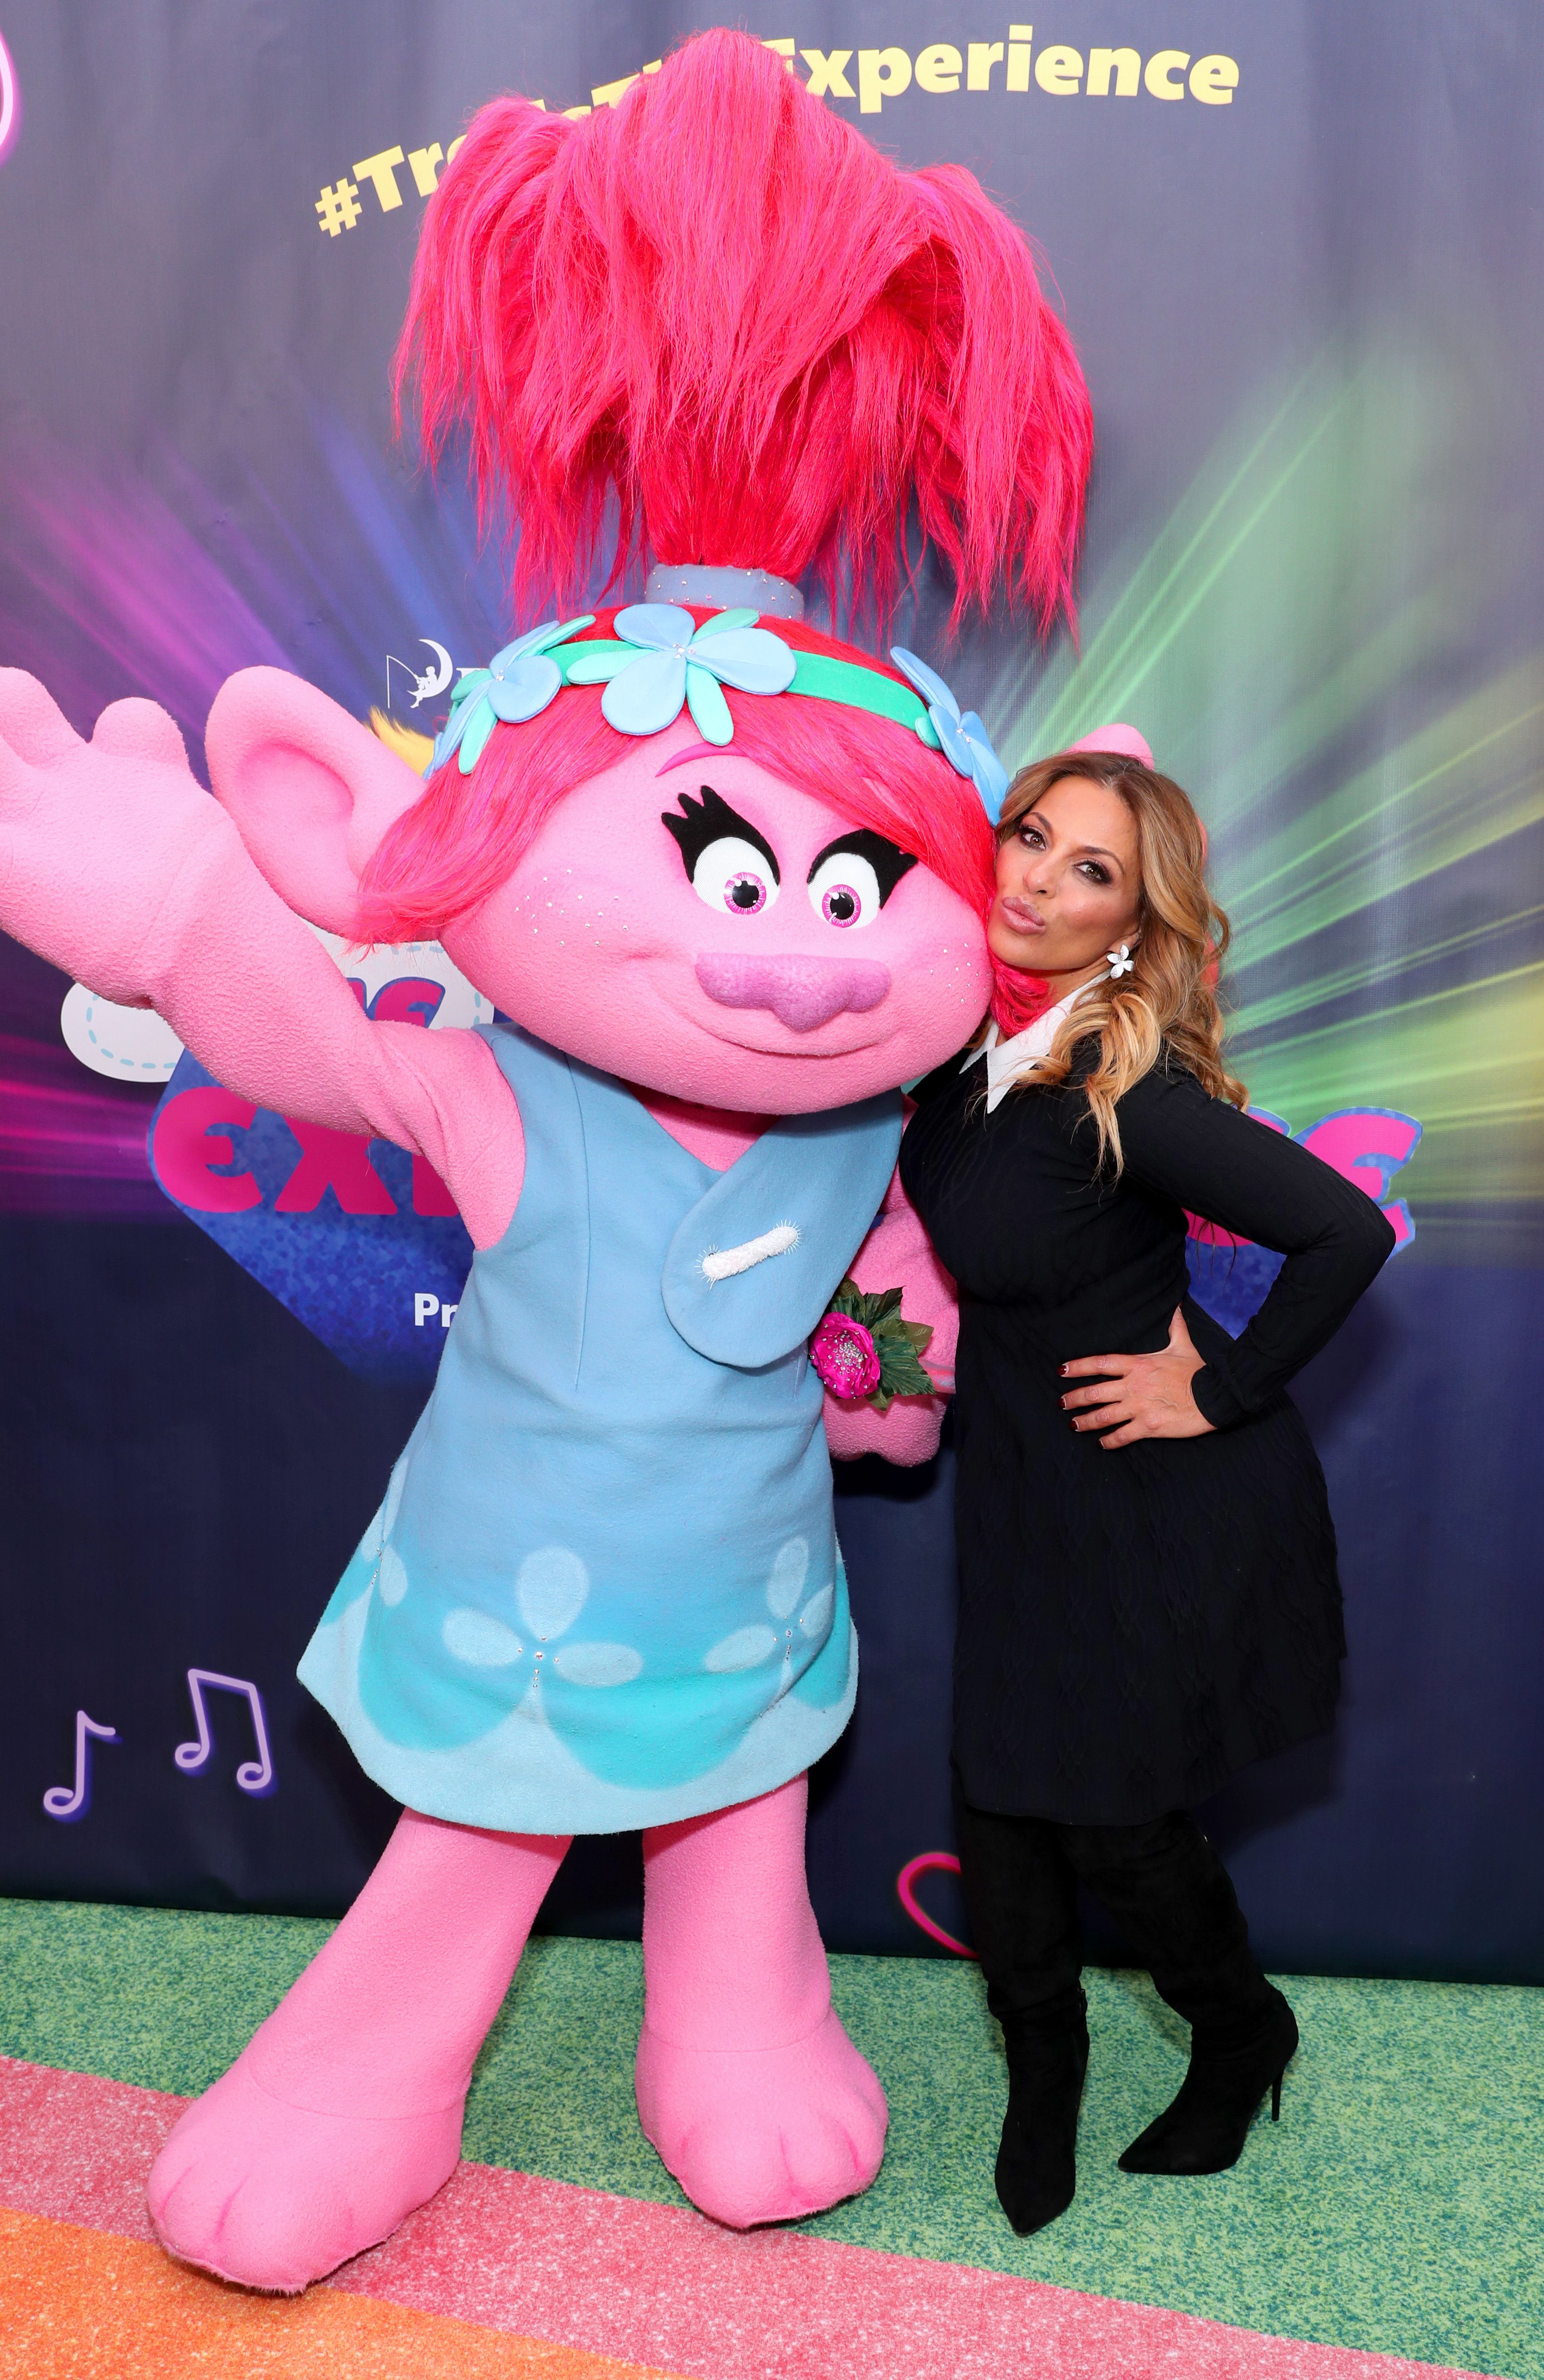 Dolores Catania poses cheek-to-cheek with 'Trolls' character.